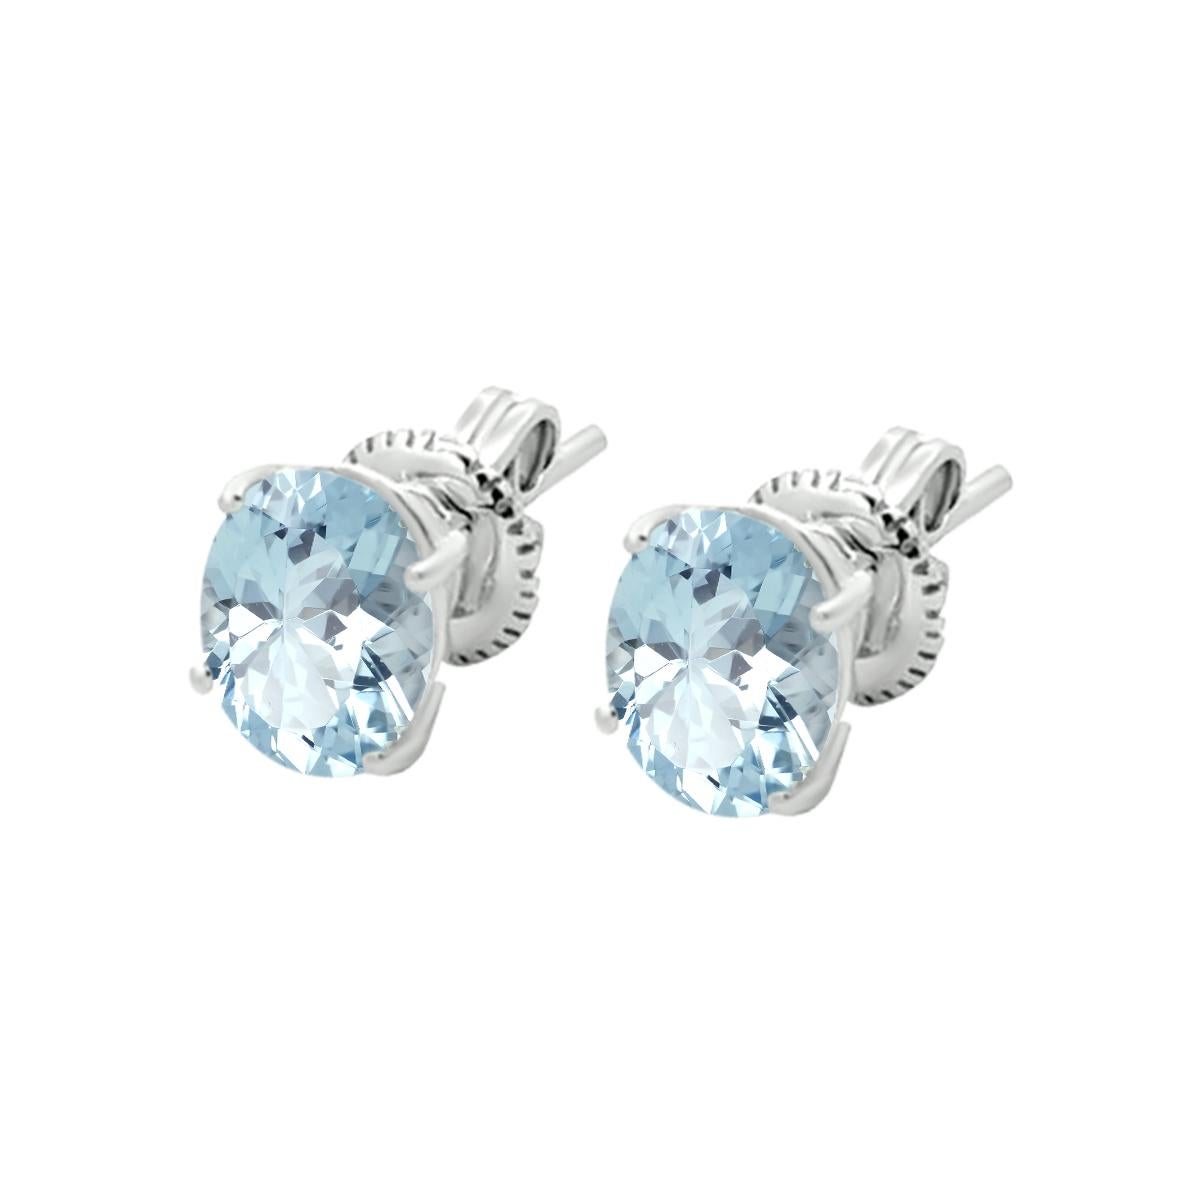 The Perfect March Birthstone Jewelry Accessory Can Be Purchased As Earring For Women And Teen Girls.
The Earrings Are Diligently Designed In 14k White Gold With Fine Oval Cut 9x7mm Aquamarine Gemstone.
The Amazing Light Weight Yet Trendy Design Of